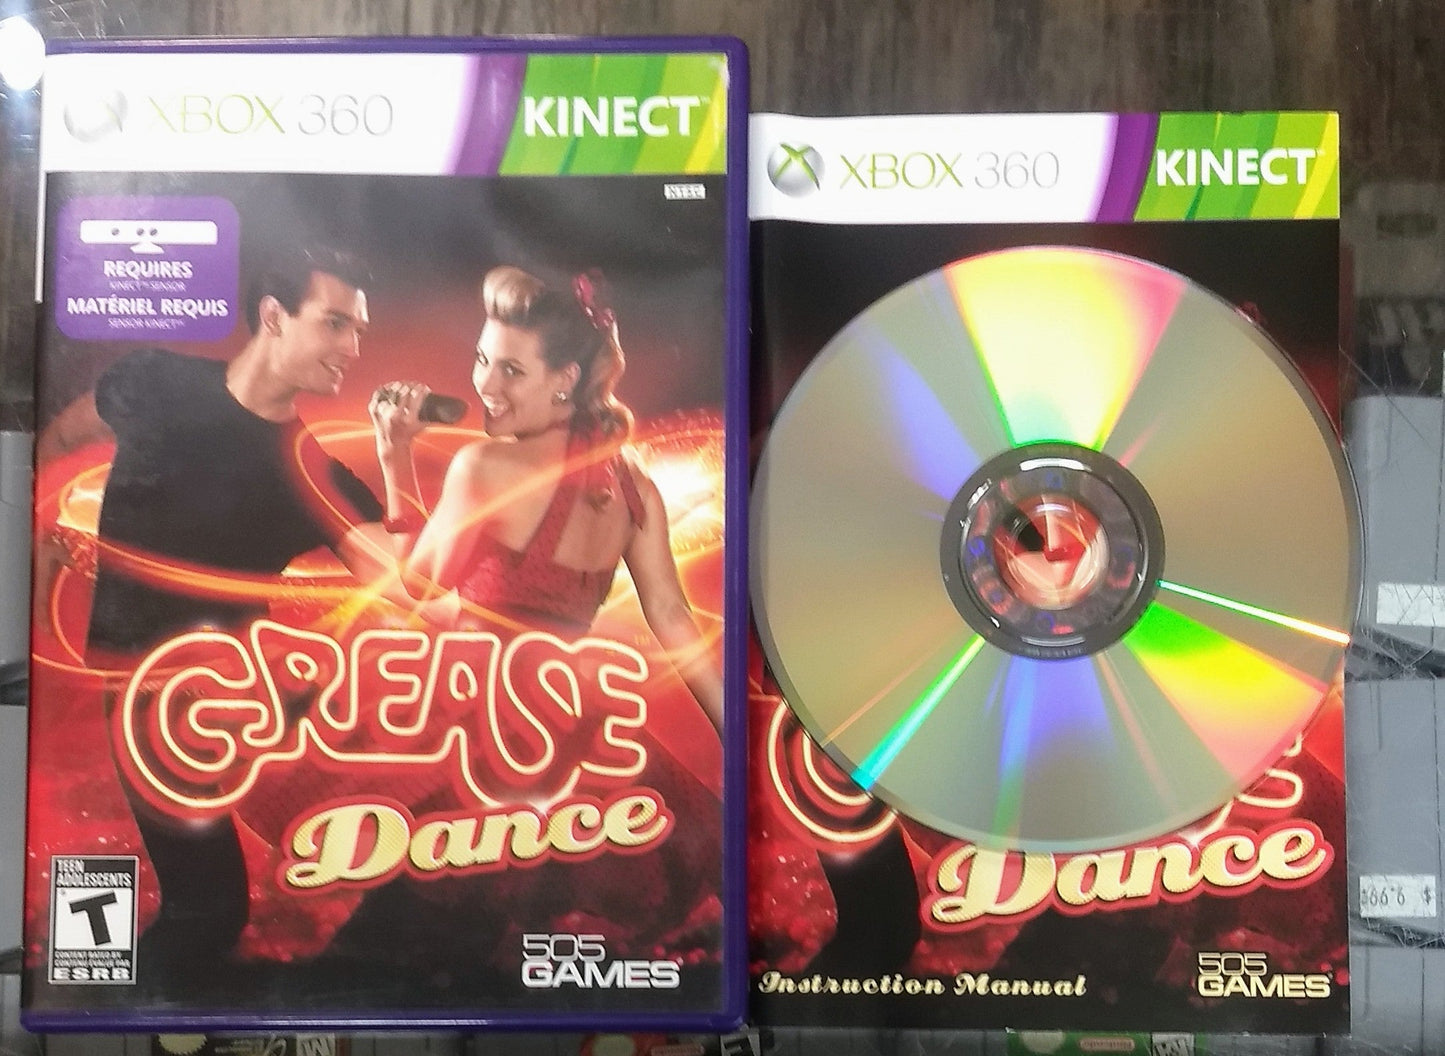 GREASE DANCE (XBOX 360 X360) - jeux video game-x